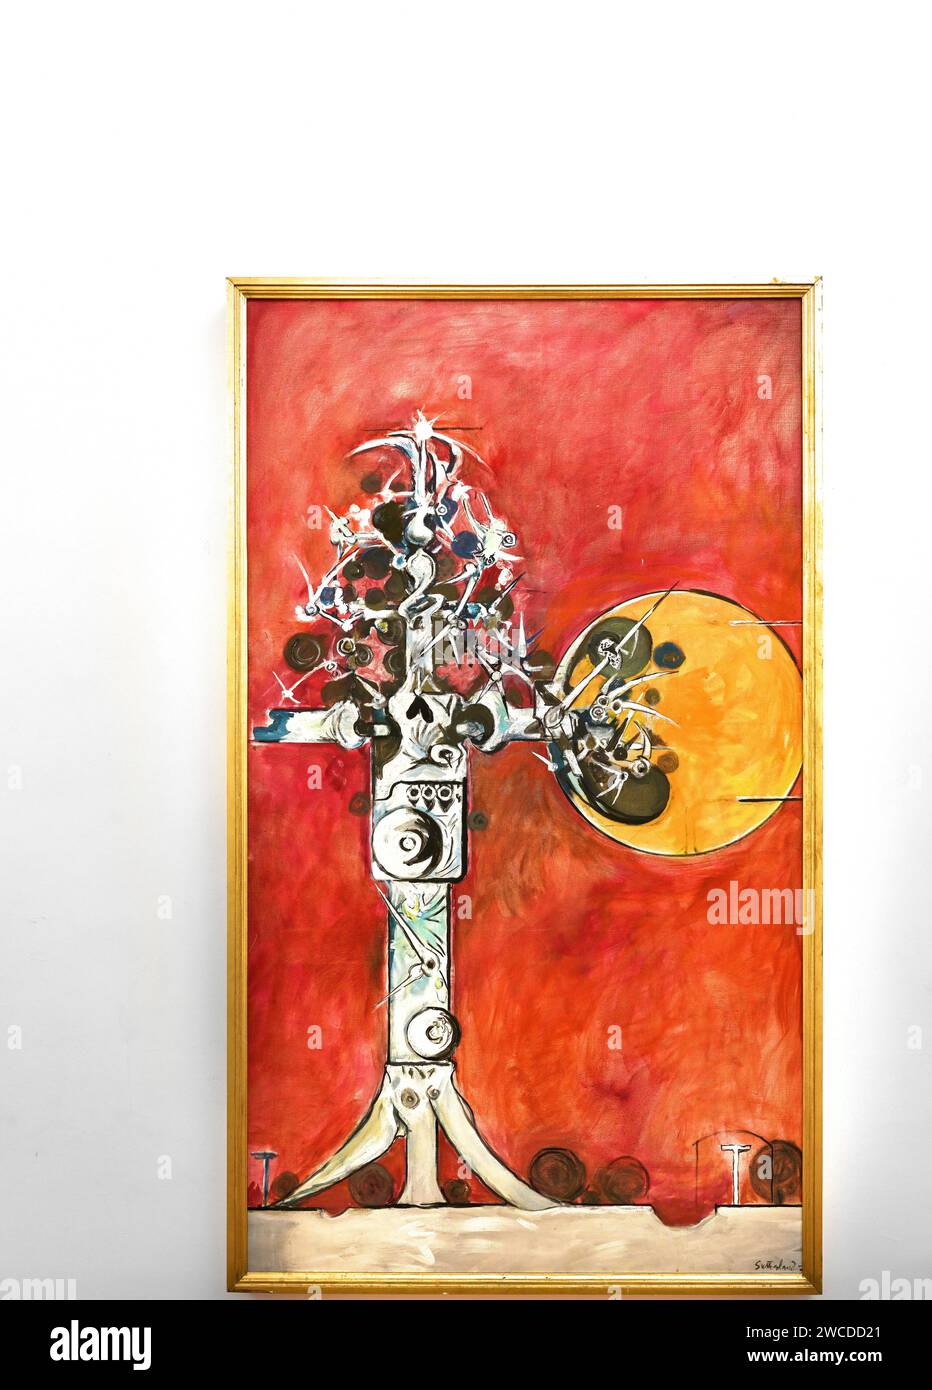 Thorn Cross or Tree of Life;  painting by Graham Sutherland in the Collection of Contemporary Art, Vatican museum, Rome, Italy. Stock Photo